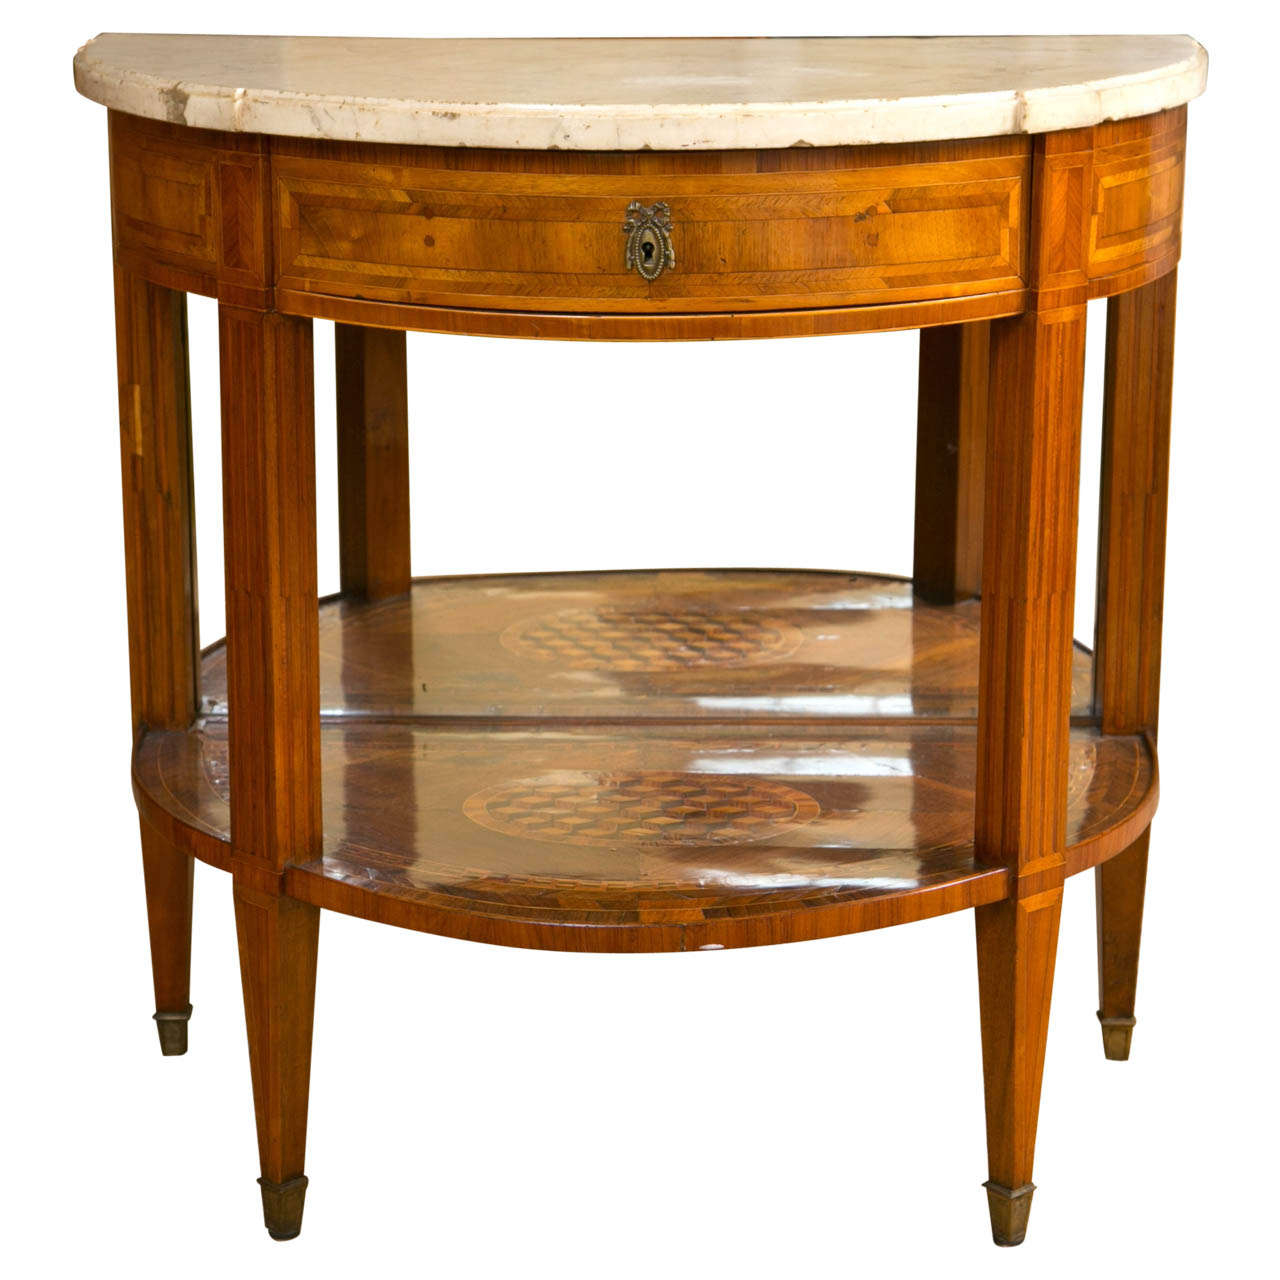 Continental marquetry inlaid demilune marble topped entry table